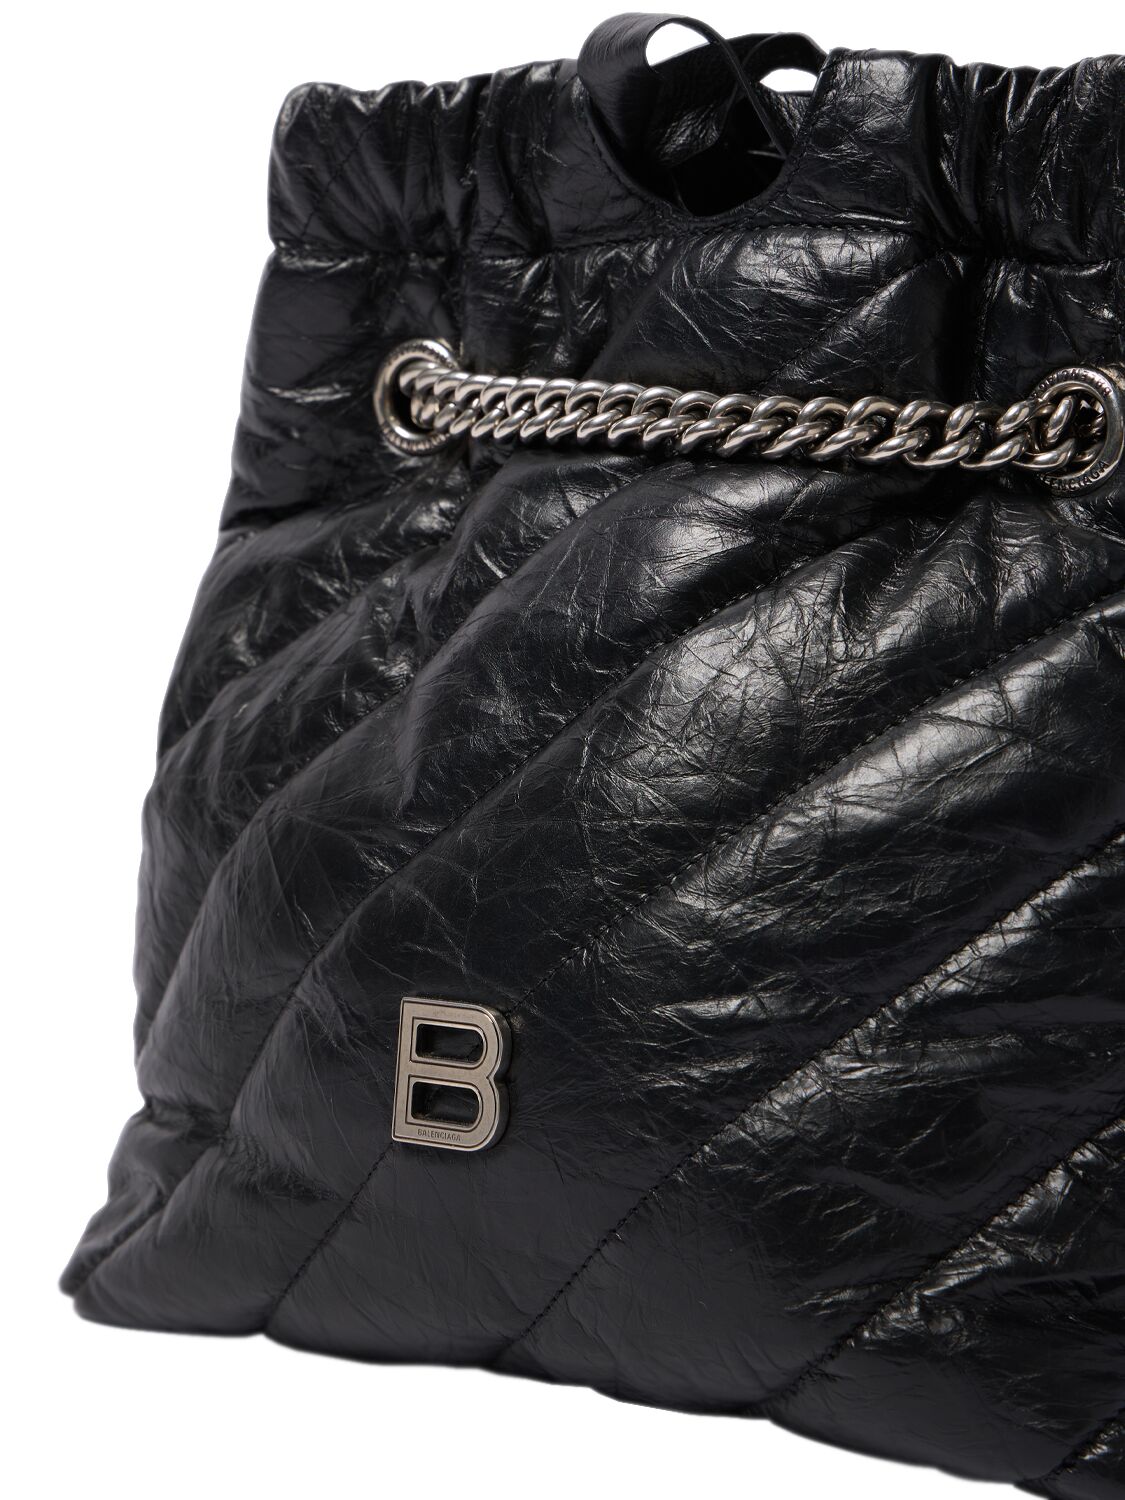 Shop Balenciaga Medium Crush Quilted Leather Tote Bag In Black